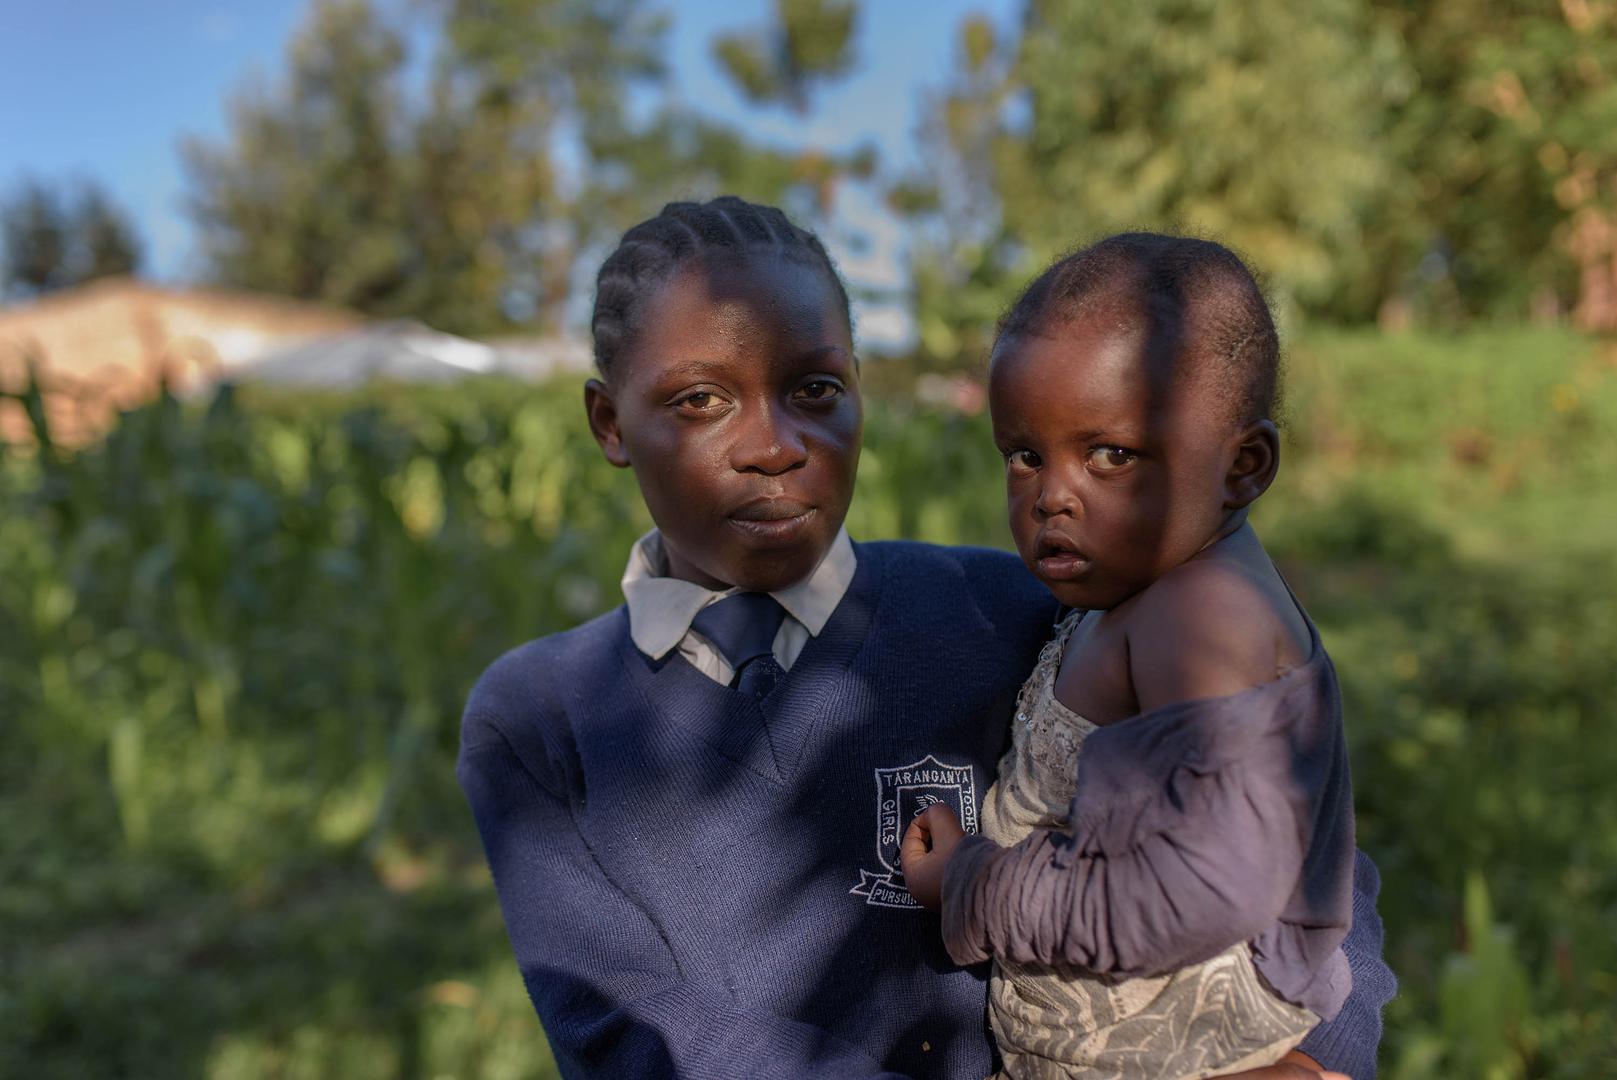 “Evelina,” 17, with her 3-year-old daughter “Hope,” in Migori county, western Kenya. Evelina is in Form 2, the second year of lower secondary school. 